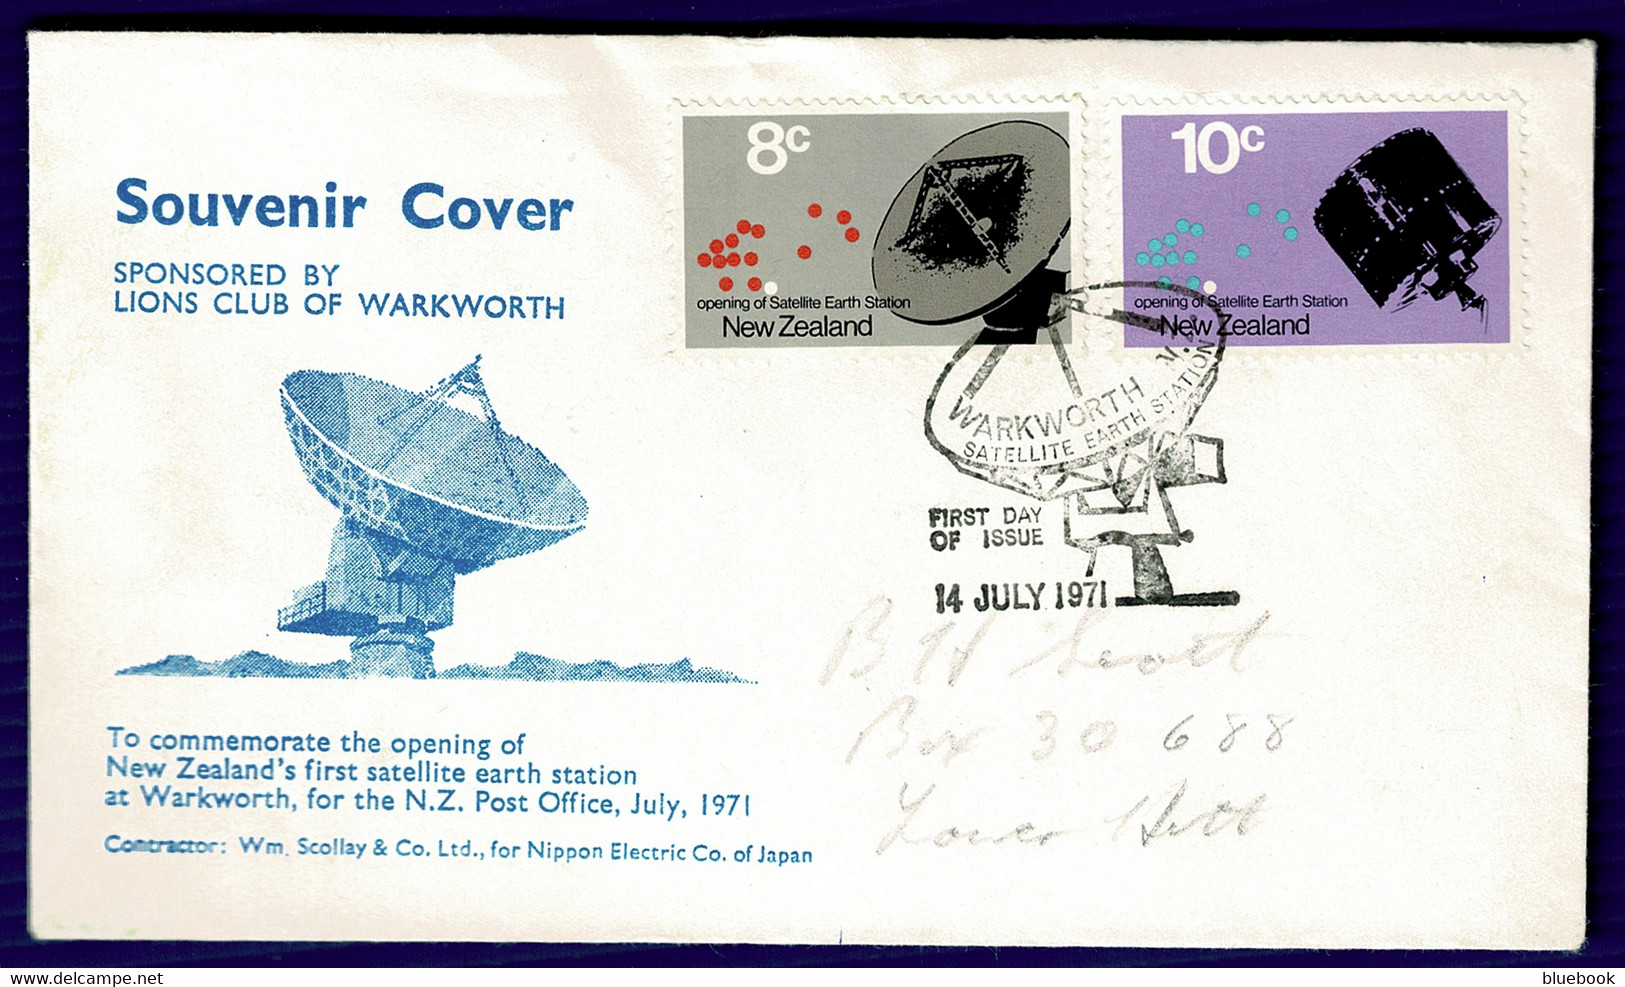 Ref 1581 - New Zealand 1971 FDC First Day Cover - Warkworth Satellite Station Postmark - Space Theme - Covers & Documents